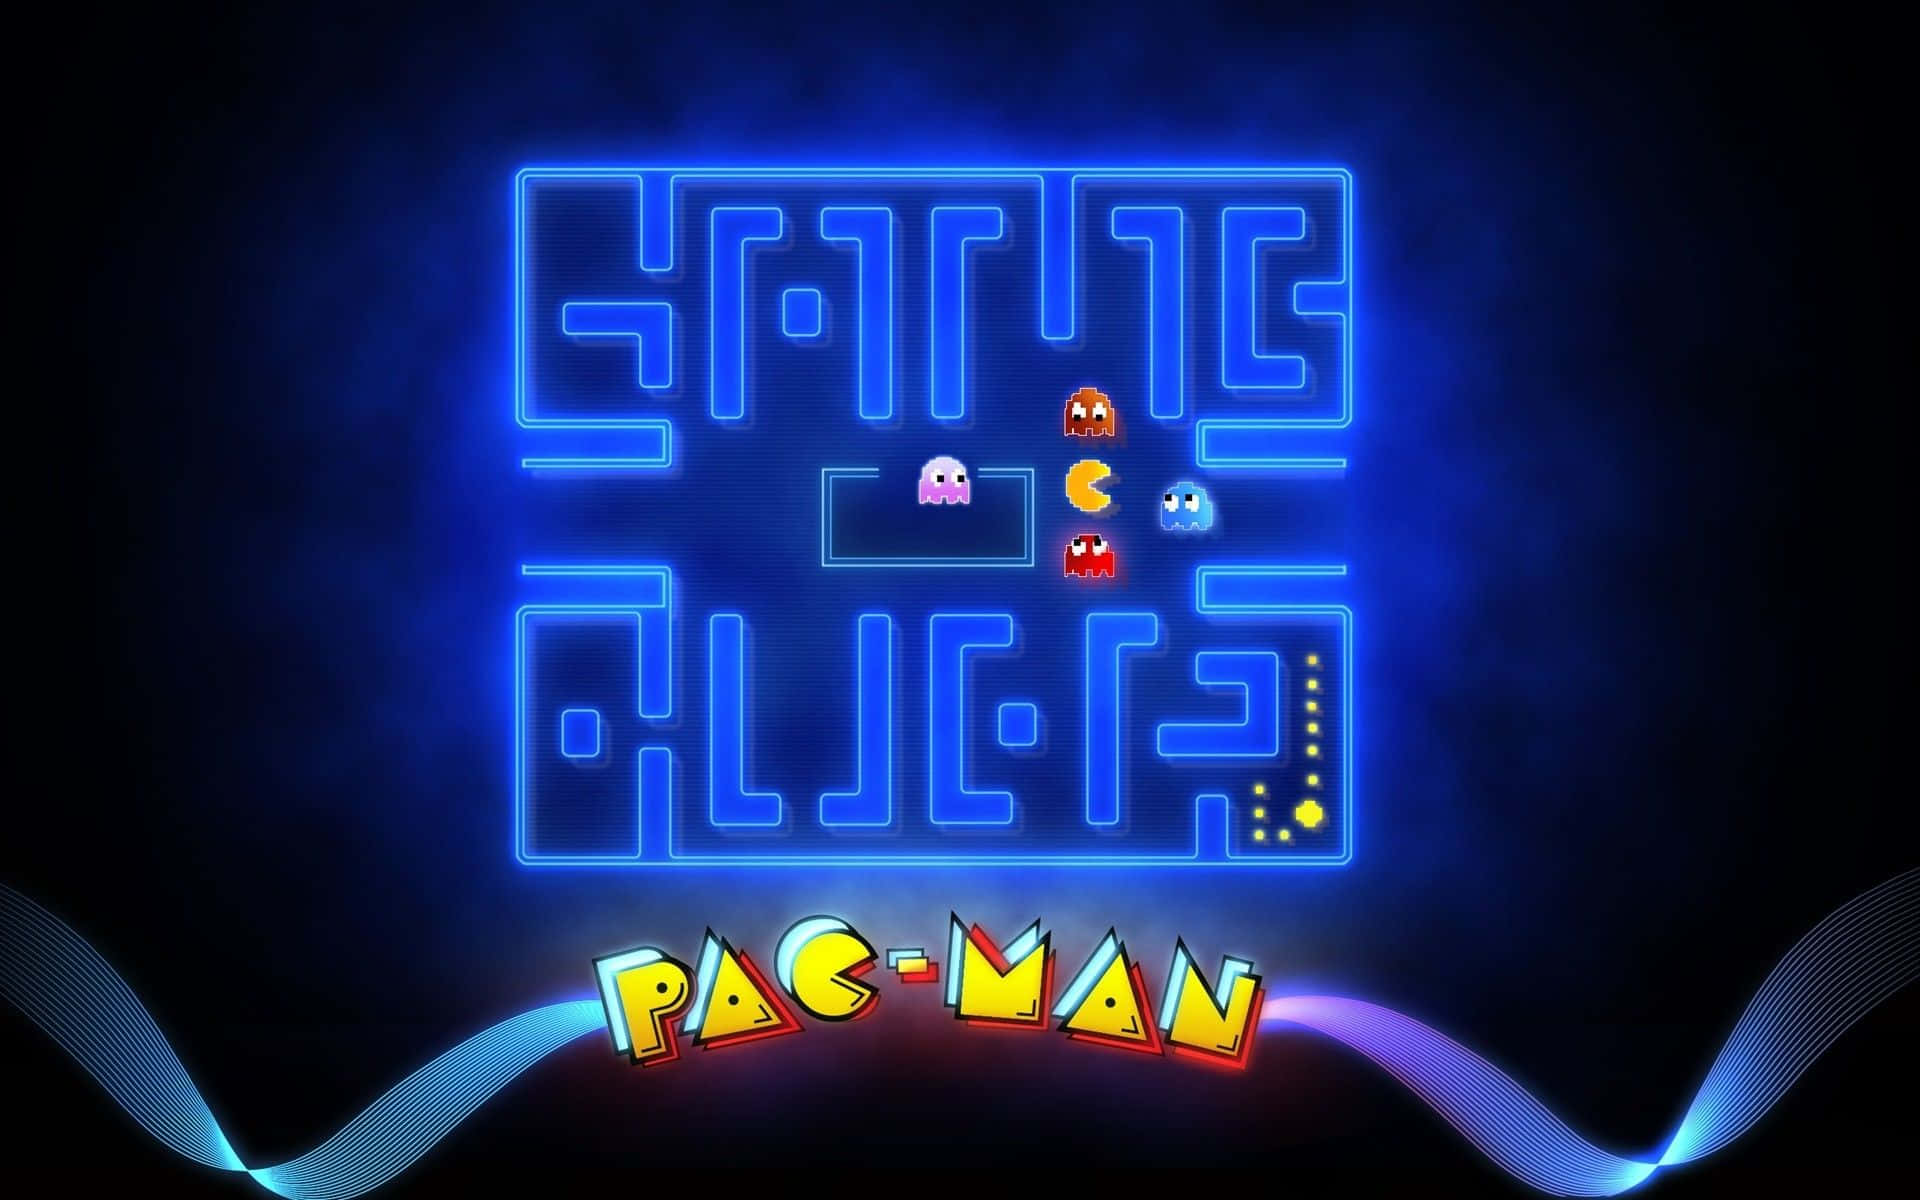 Enjoy the classic Pacman game with this futuristic neon Pacman background